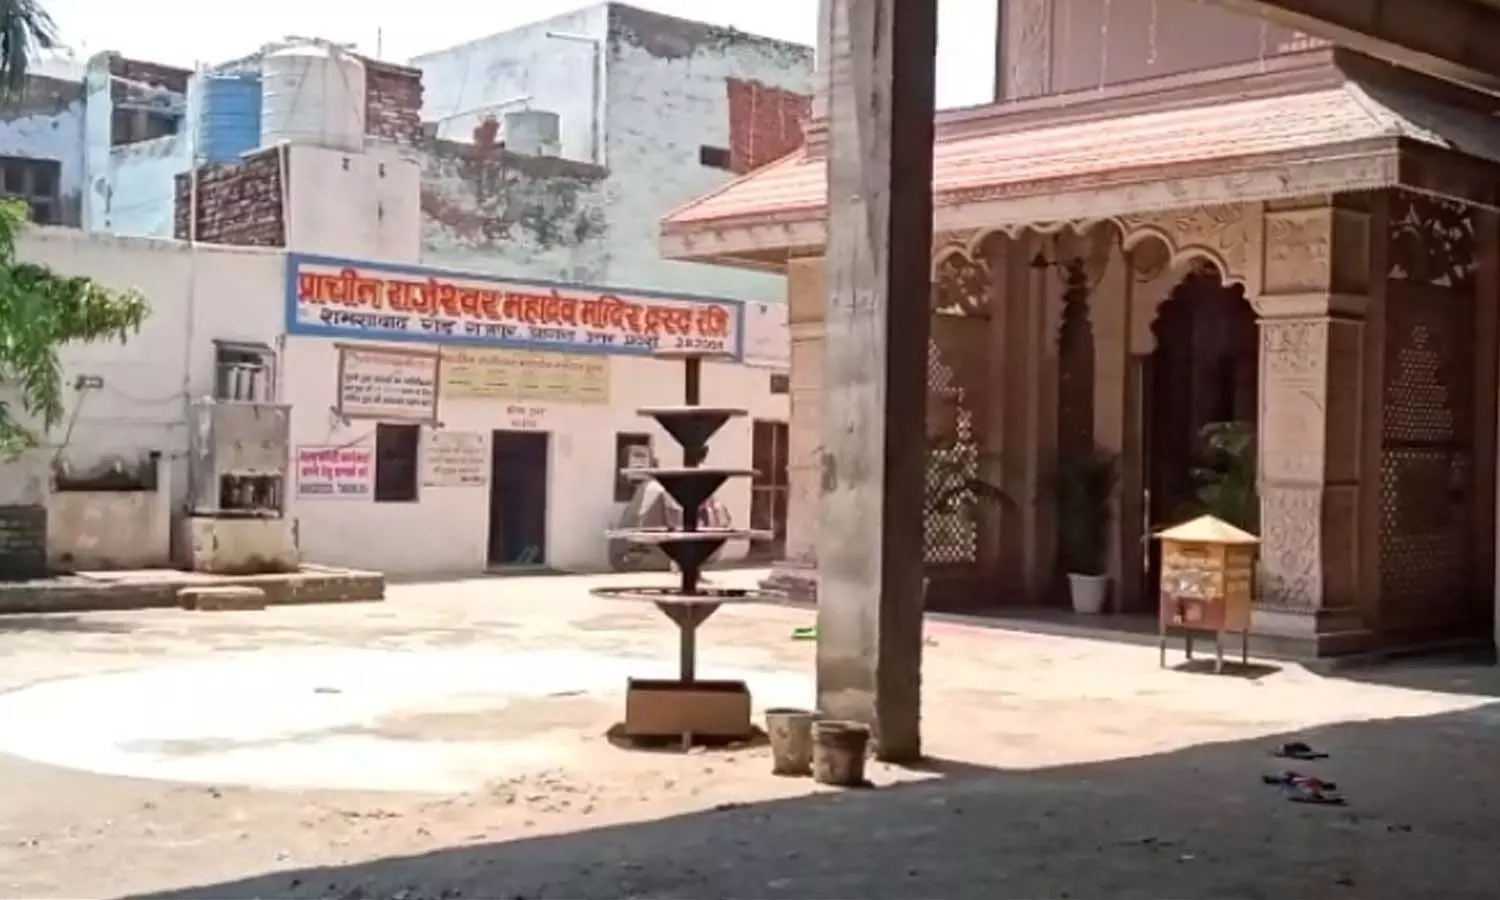 No community is allowed to set up shop of worship material near Rajeshwar temple